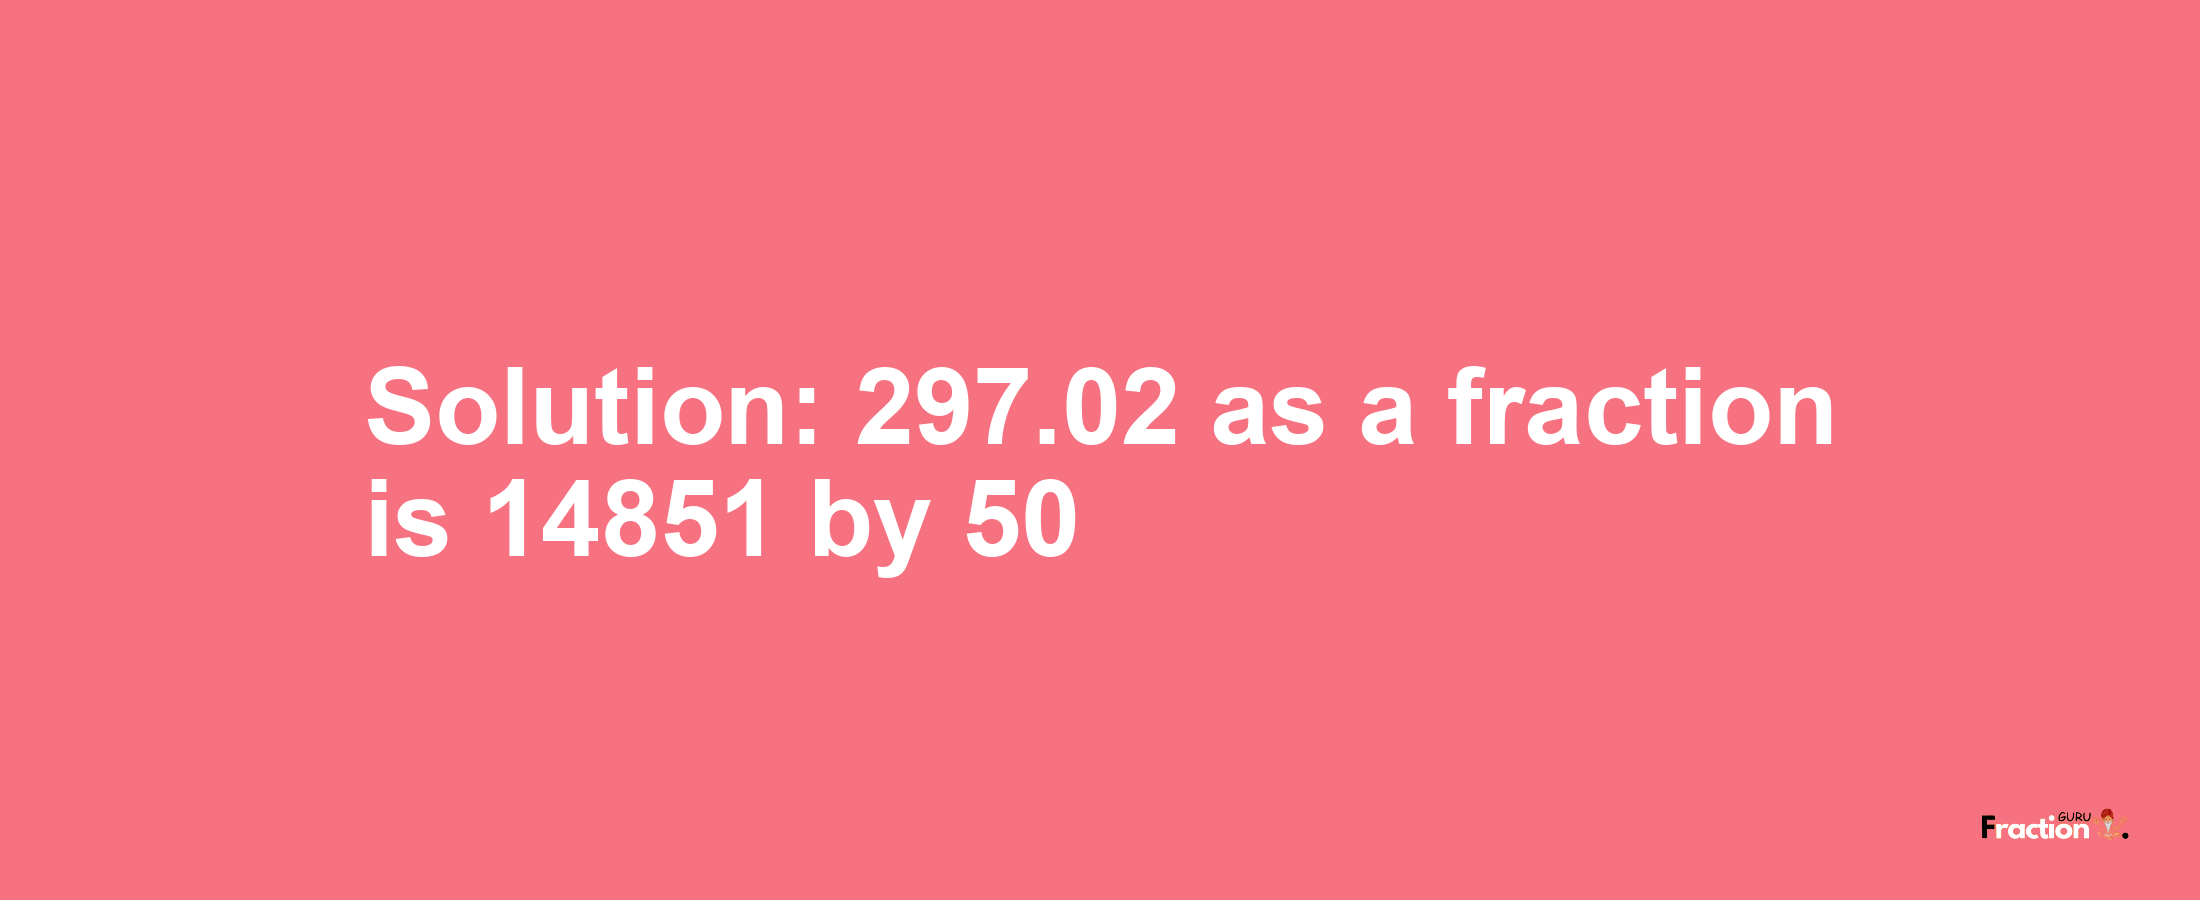 Solution:297.02 as a fraction is 14851/50